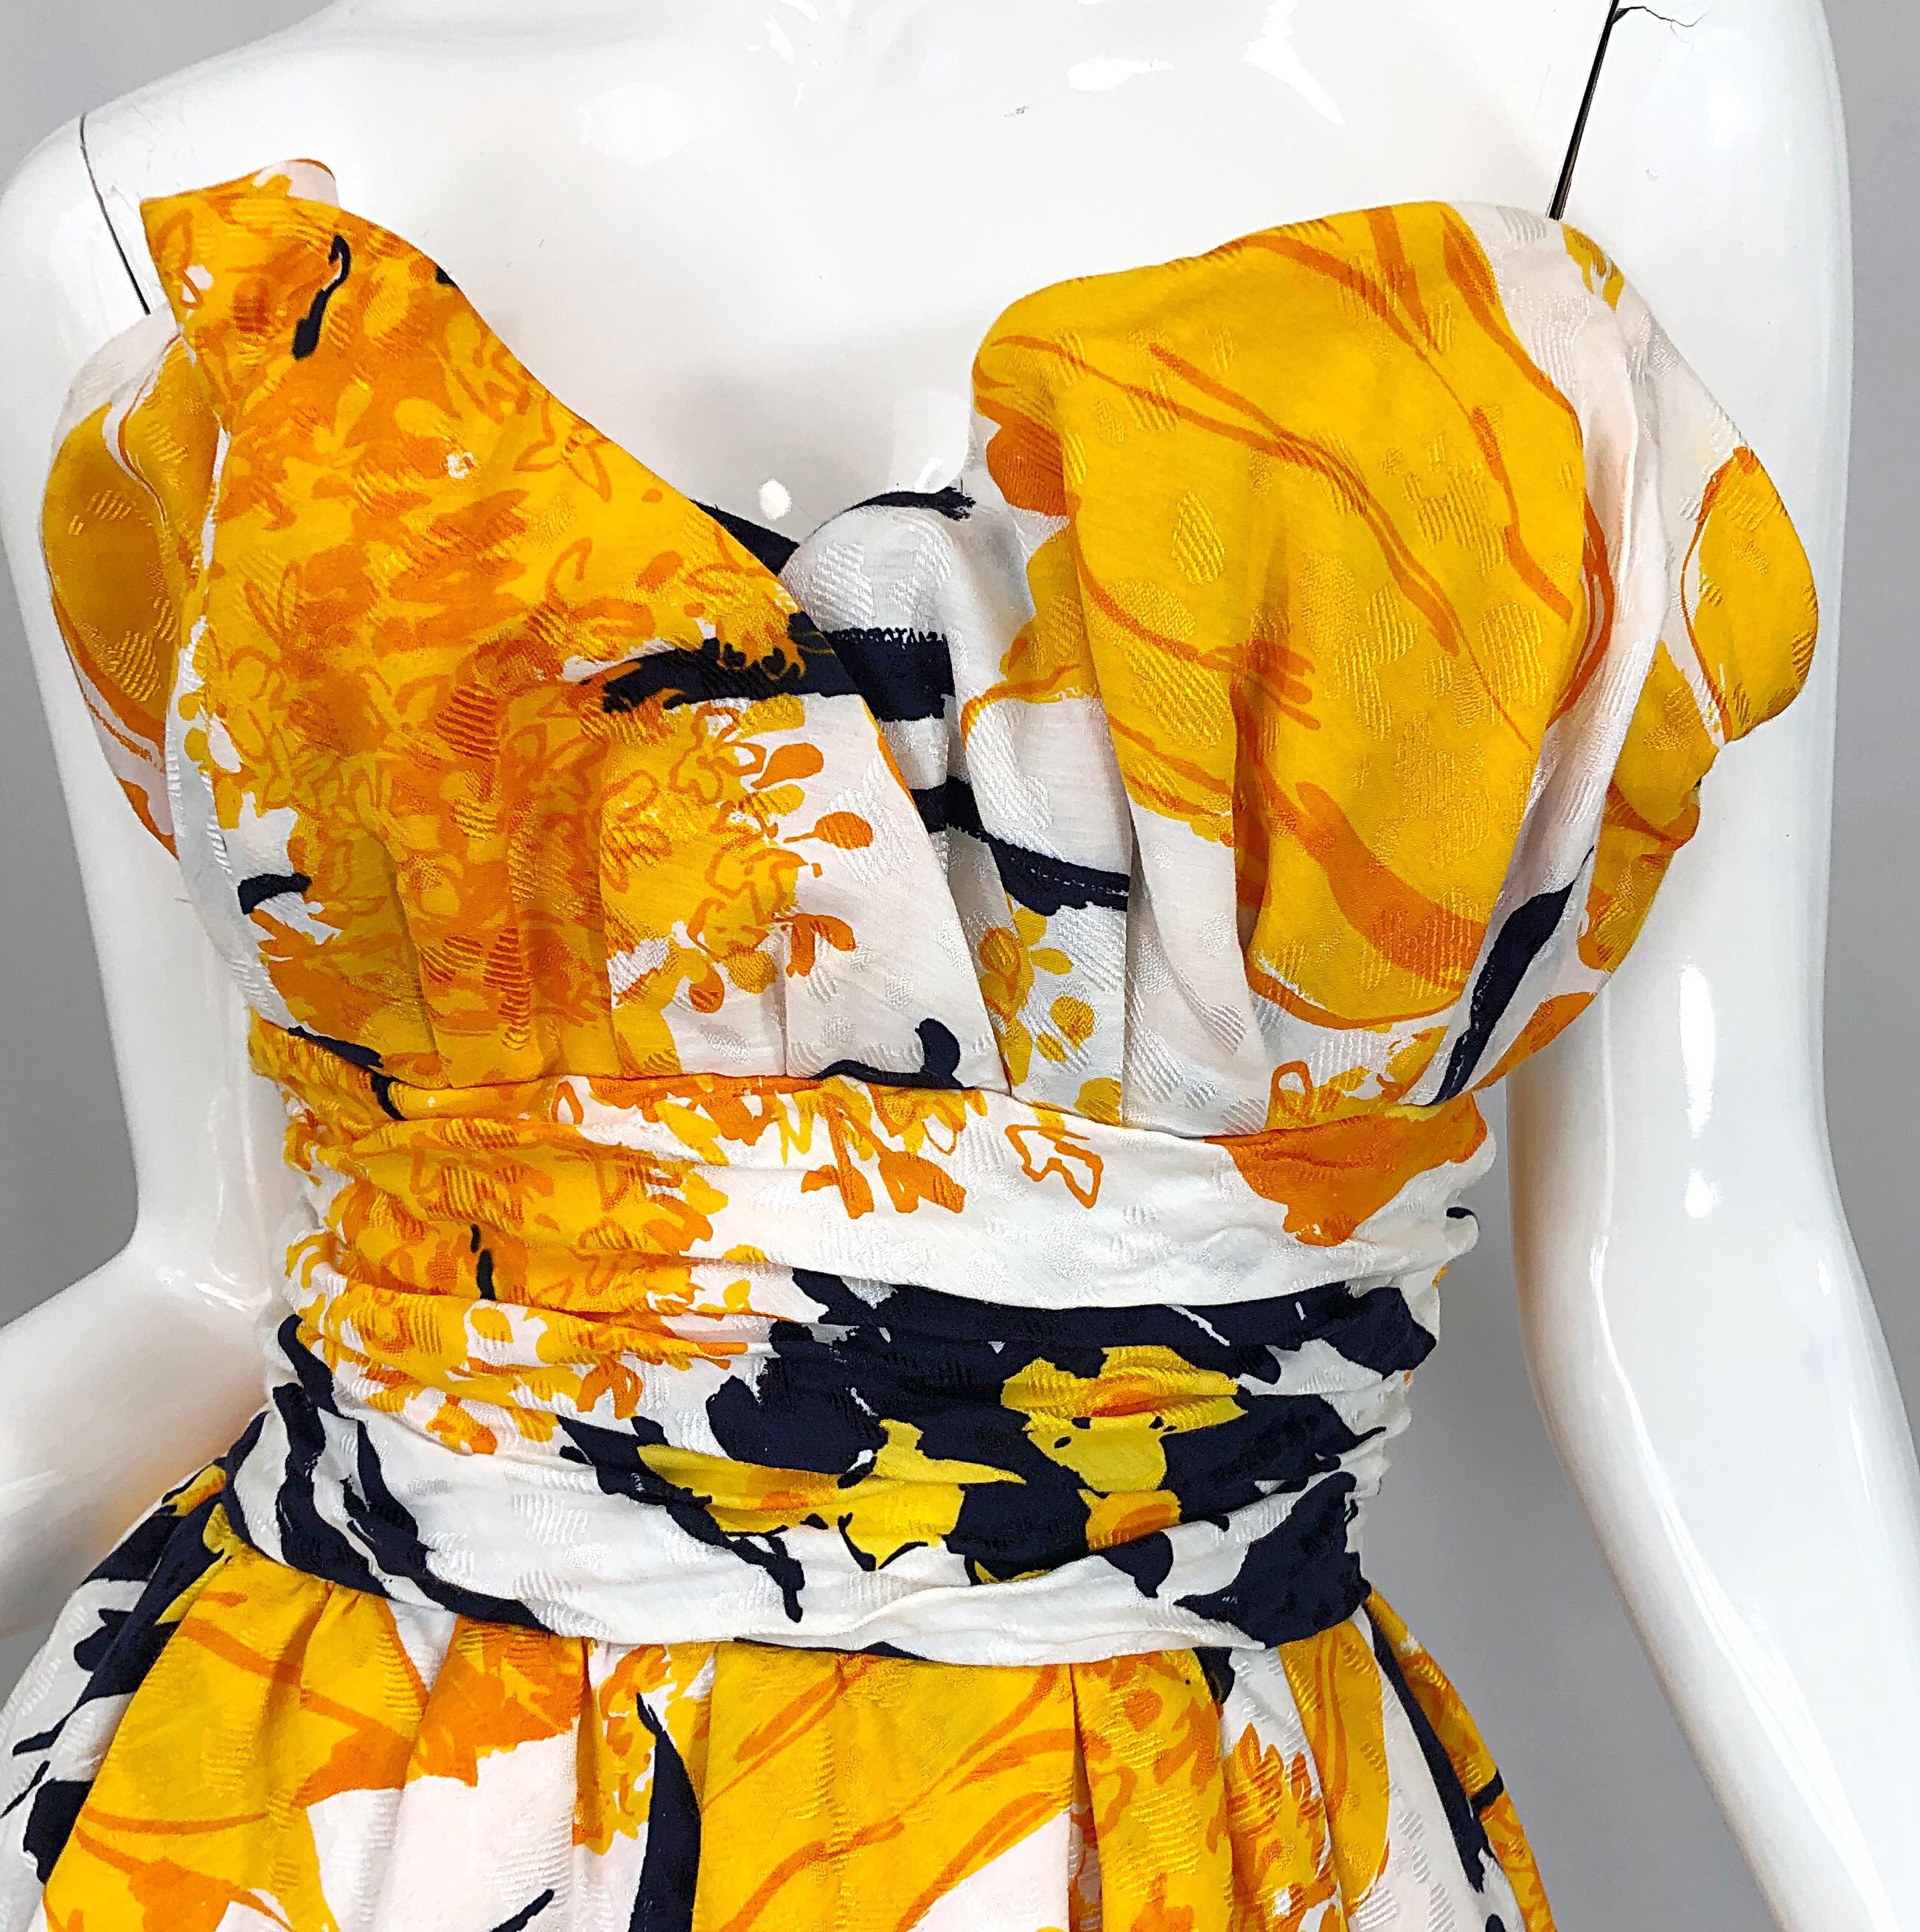 Avant Garde 1980s Amen Wardy Abstract Flower Print Vintage 80s Strapless Dress In Excellent Condition For Sale In San Diego, CA